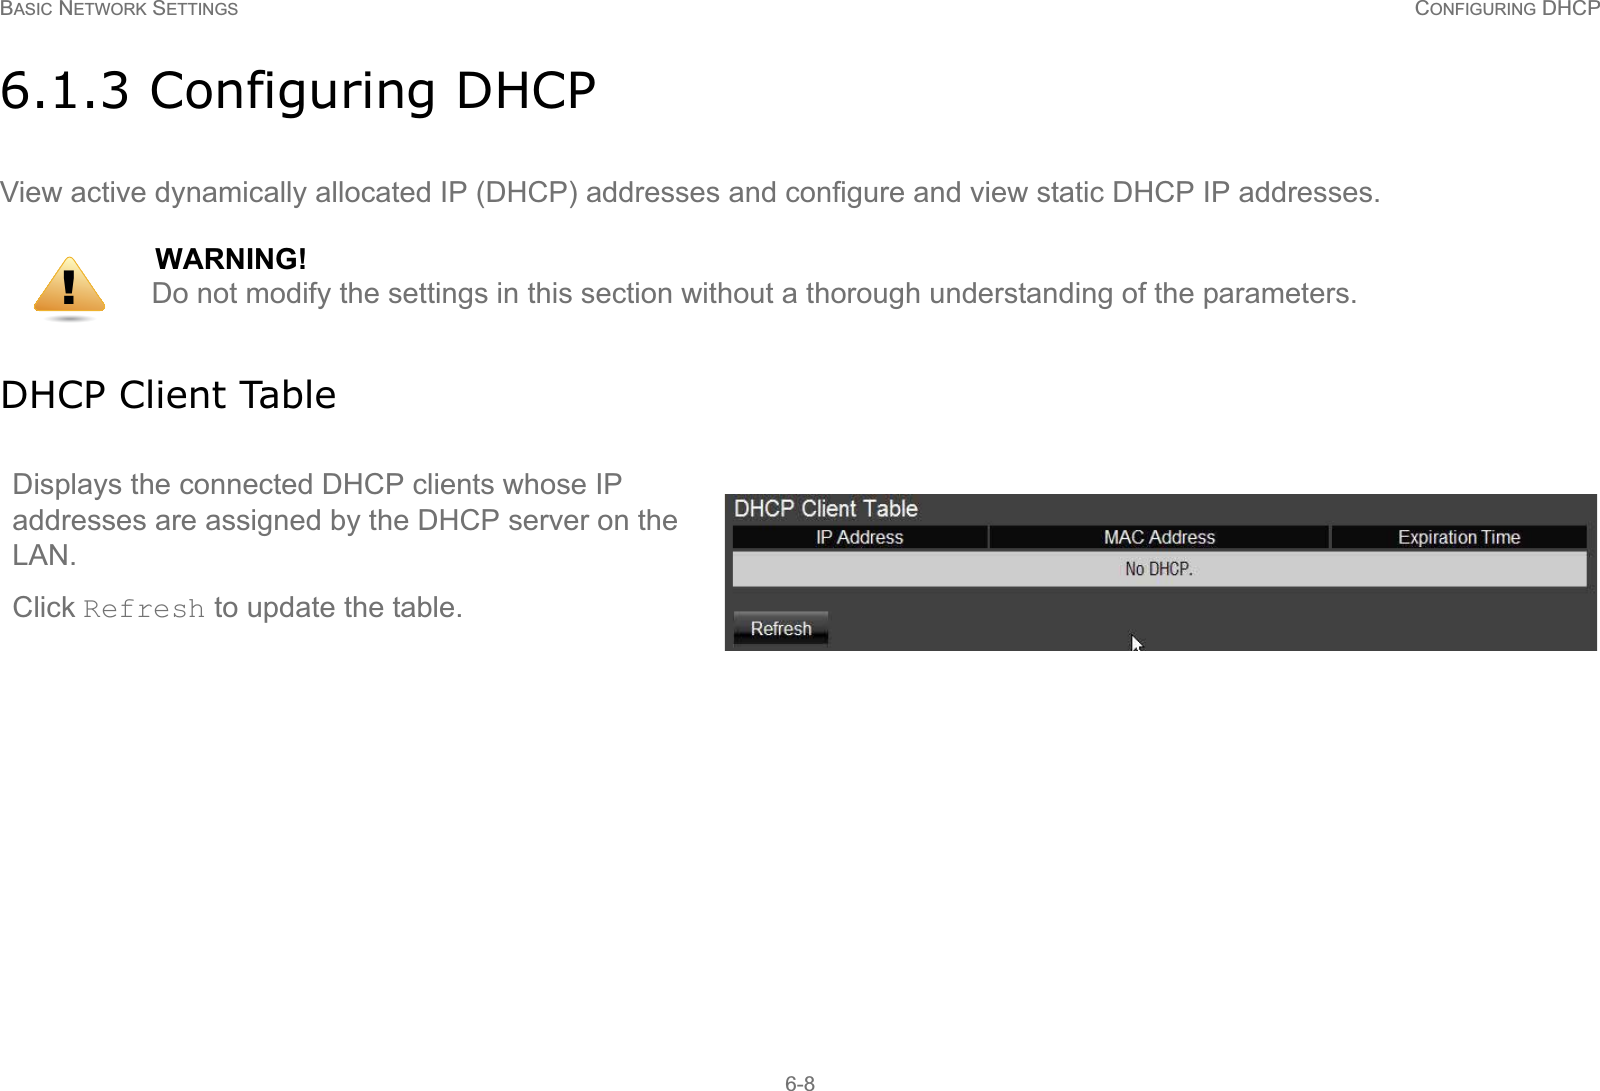 BASIC NETWORK SETTINGS CONFIGURING DHCP6-86.1.3 Configuring DHCPView active dynamically allocated IP (DHCP) addresses and configure and view static DHCP IP addresses.DHCP Client TableWARNING!Do not modify the settings in this section without a thorough understanding of the parameters.Displays the connected DHCP clients whose IP addresses are assigned by the DHCP server on the LAN. Click Refresh to update the table.!